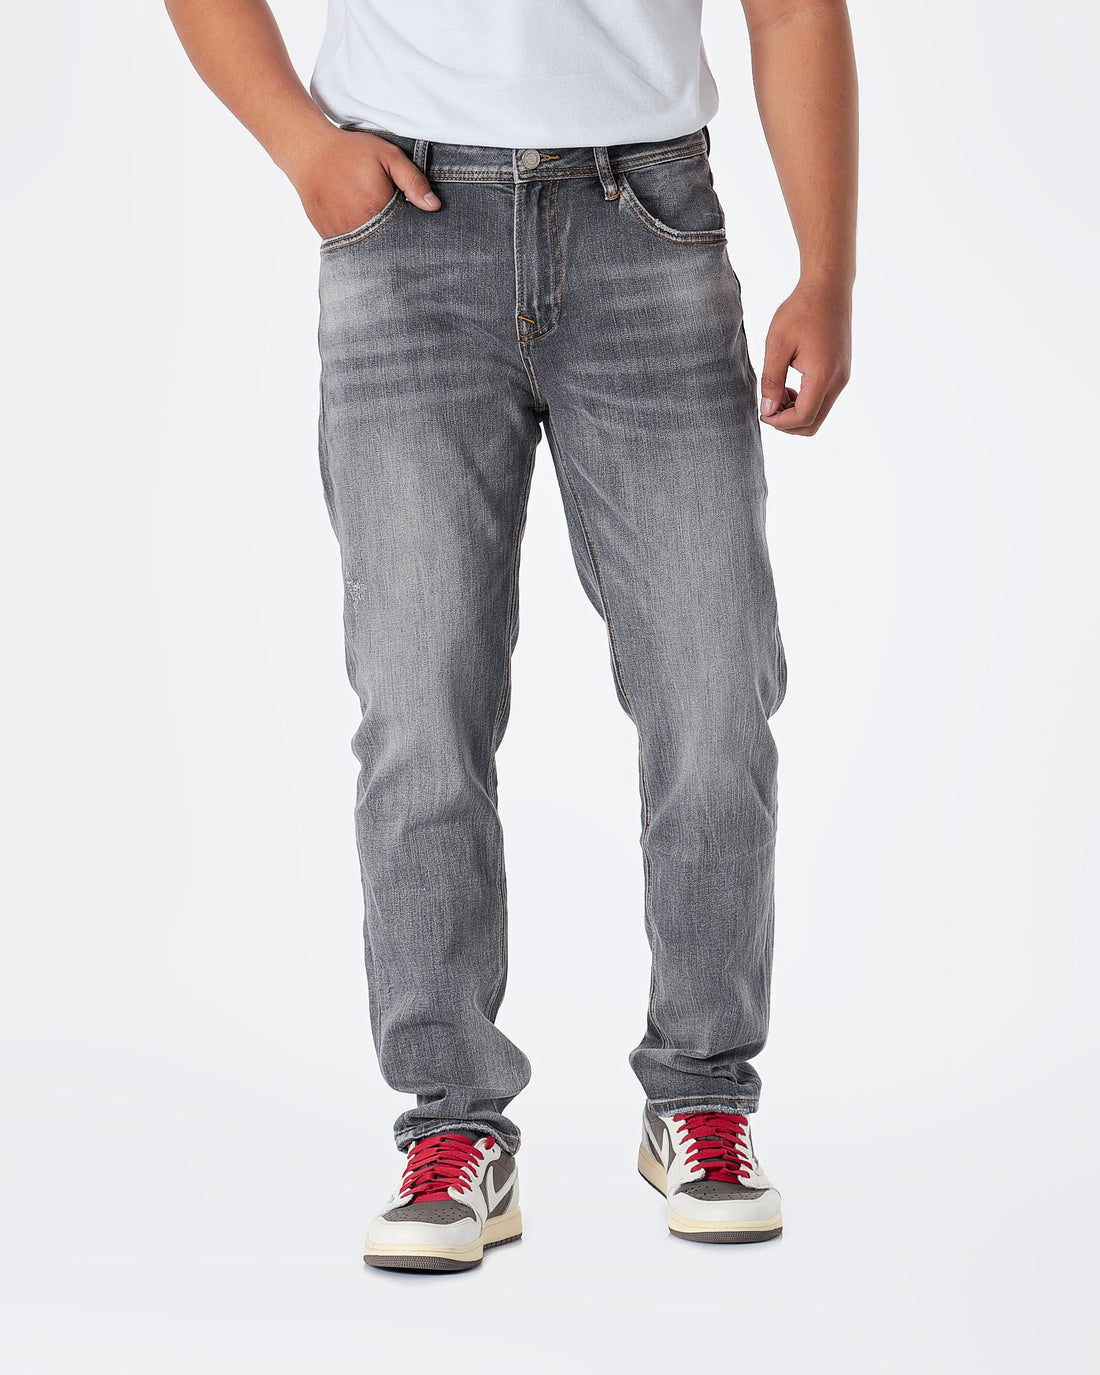 MOI OUTFIT-CD Embroidered Men Jeans 69.90